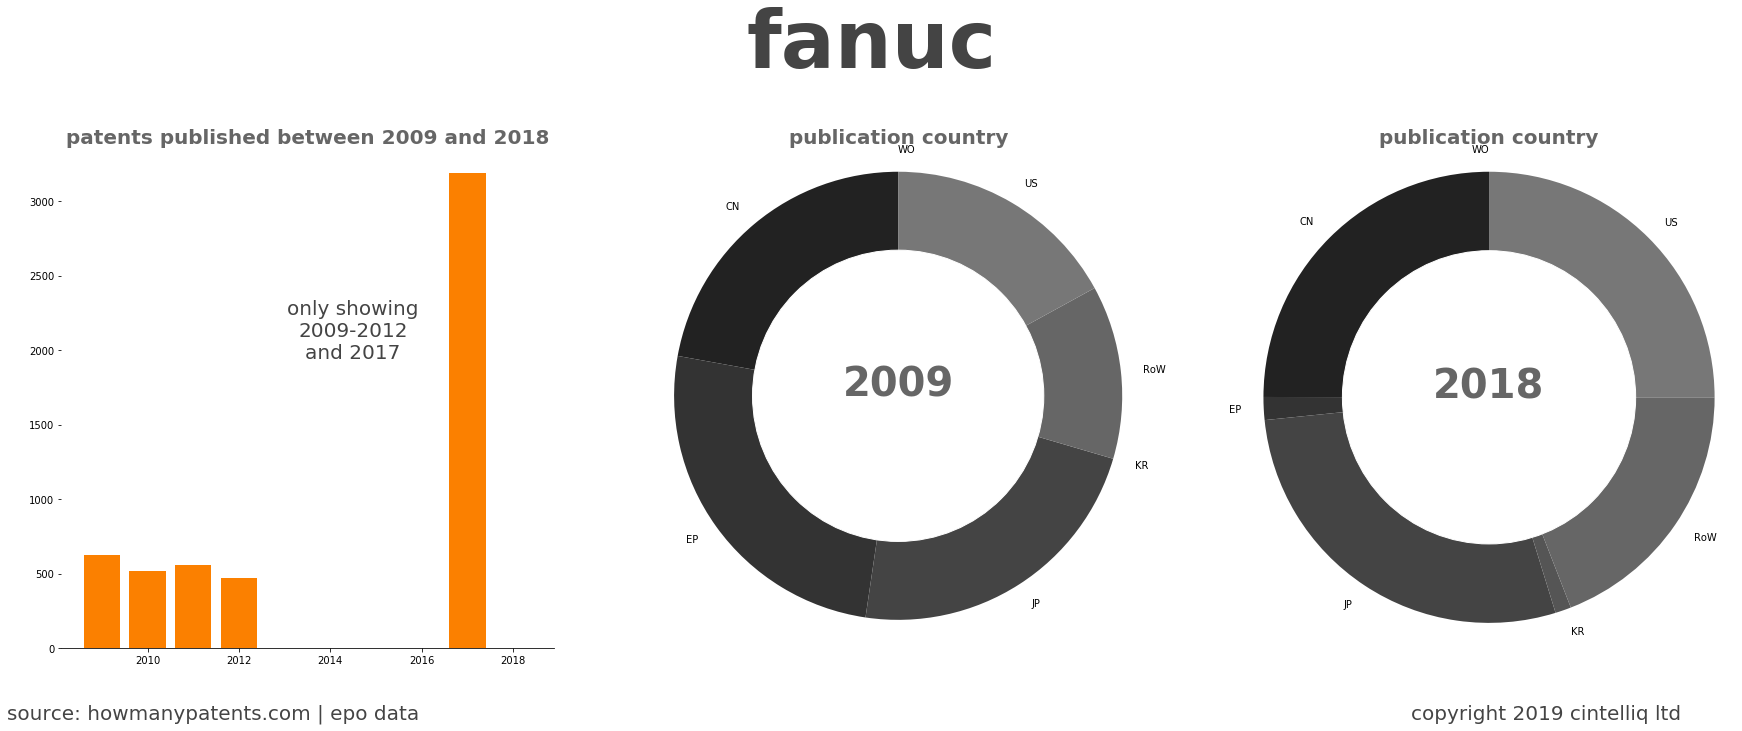 summary of patents for Fanuc